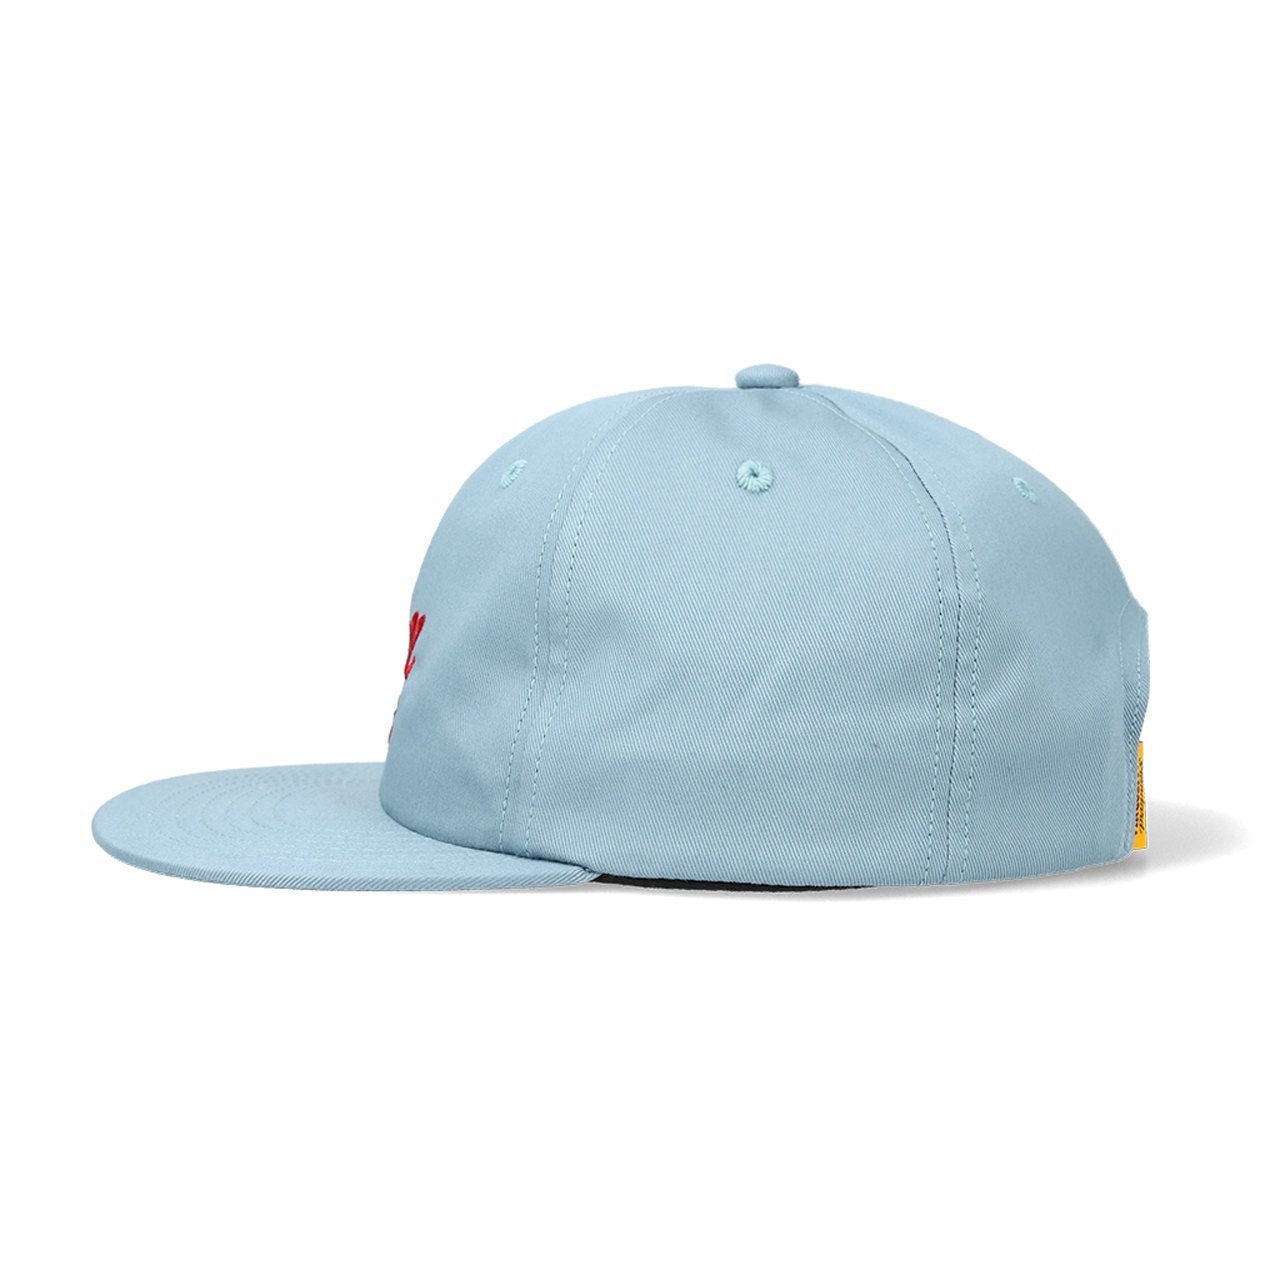 <img class='new_mark_img1' src='https://img.shop-pro.jp/img/new/icons5.gif' style='border:none;display:inline;margin:0px;padding:0px;width:auto;' />STANDARD CALIFORNIA ( ե˥)Chill Chic Twill Cap Blue